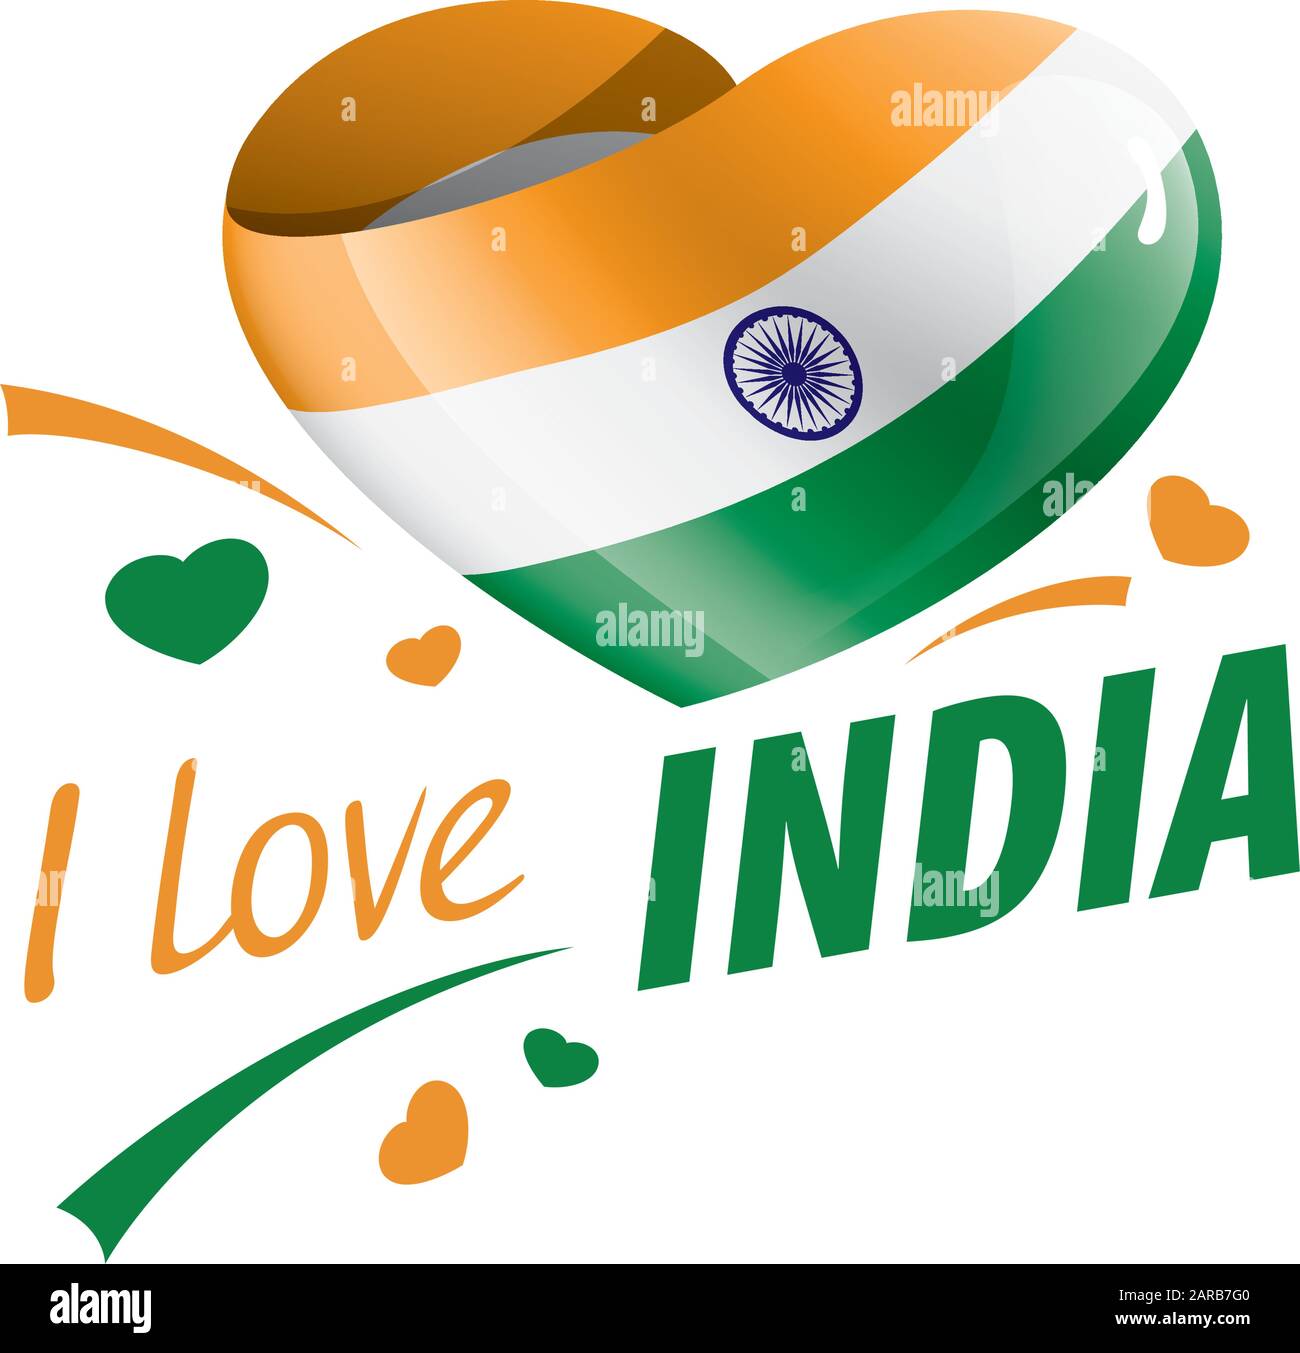 national-flag-of-the-india-in-the-shape-of-a-heart-and-the-inscription-i-love-india-vector-illustration-2ARB7G0.jpg